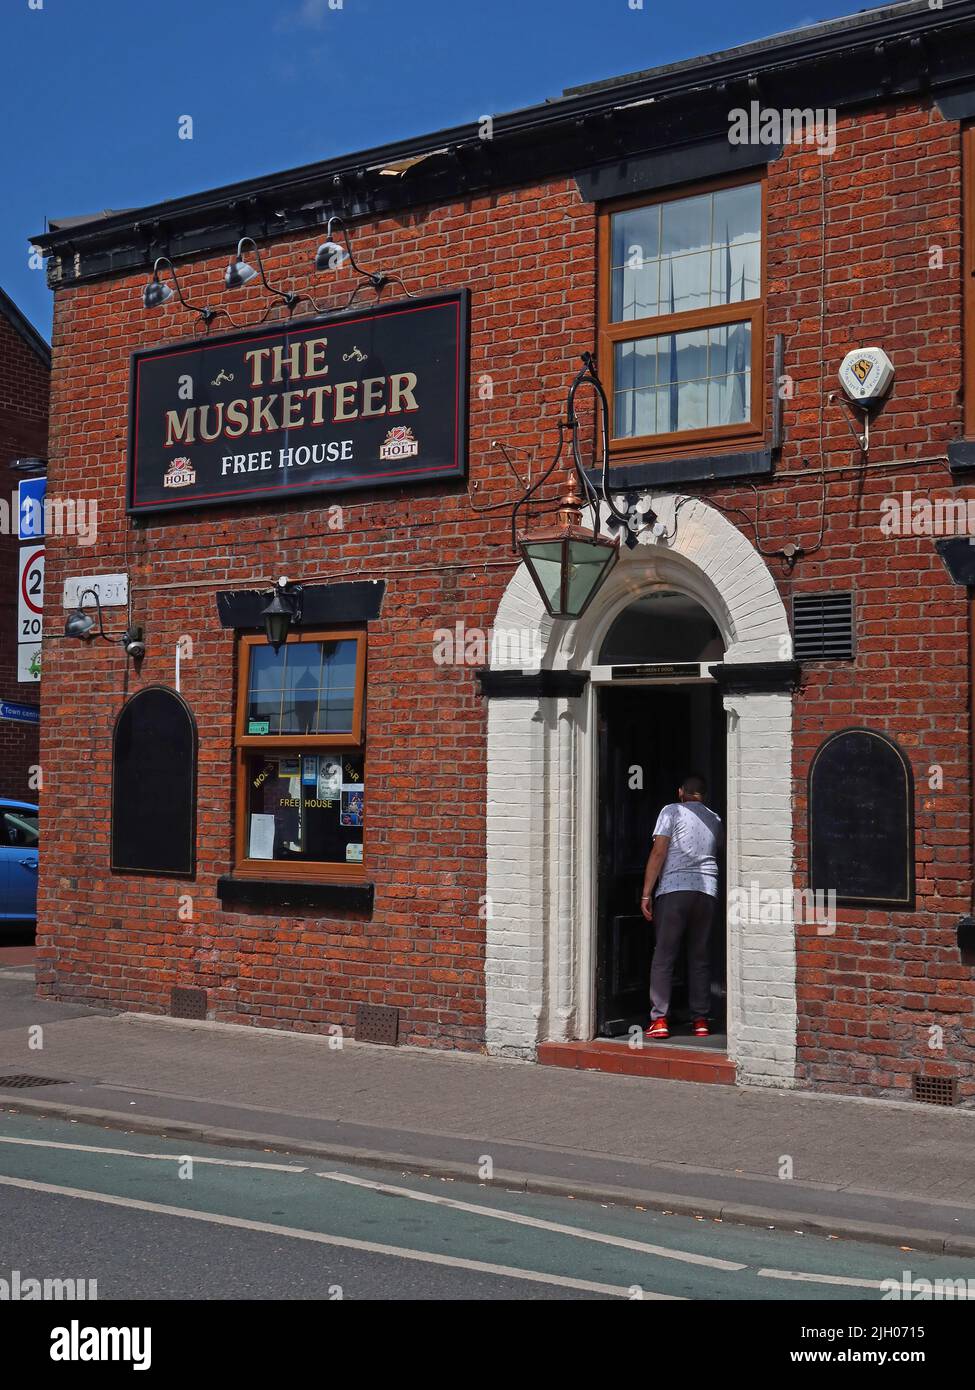 The Musketeer, Holt Free House, pub, 15 Lord St, Leigh, Wigan, Lancs, England, UK, WN7 1AB Stock Photo